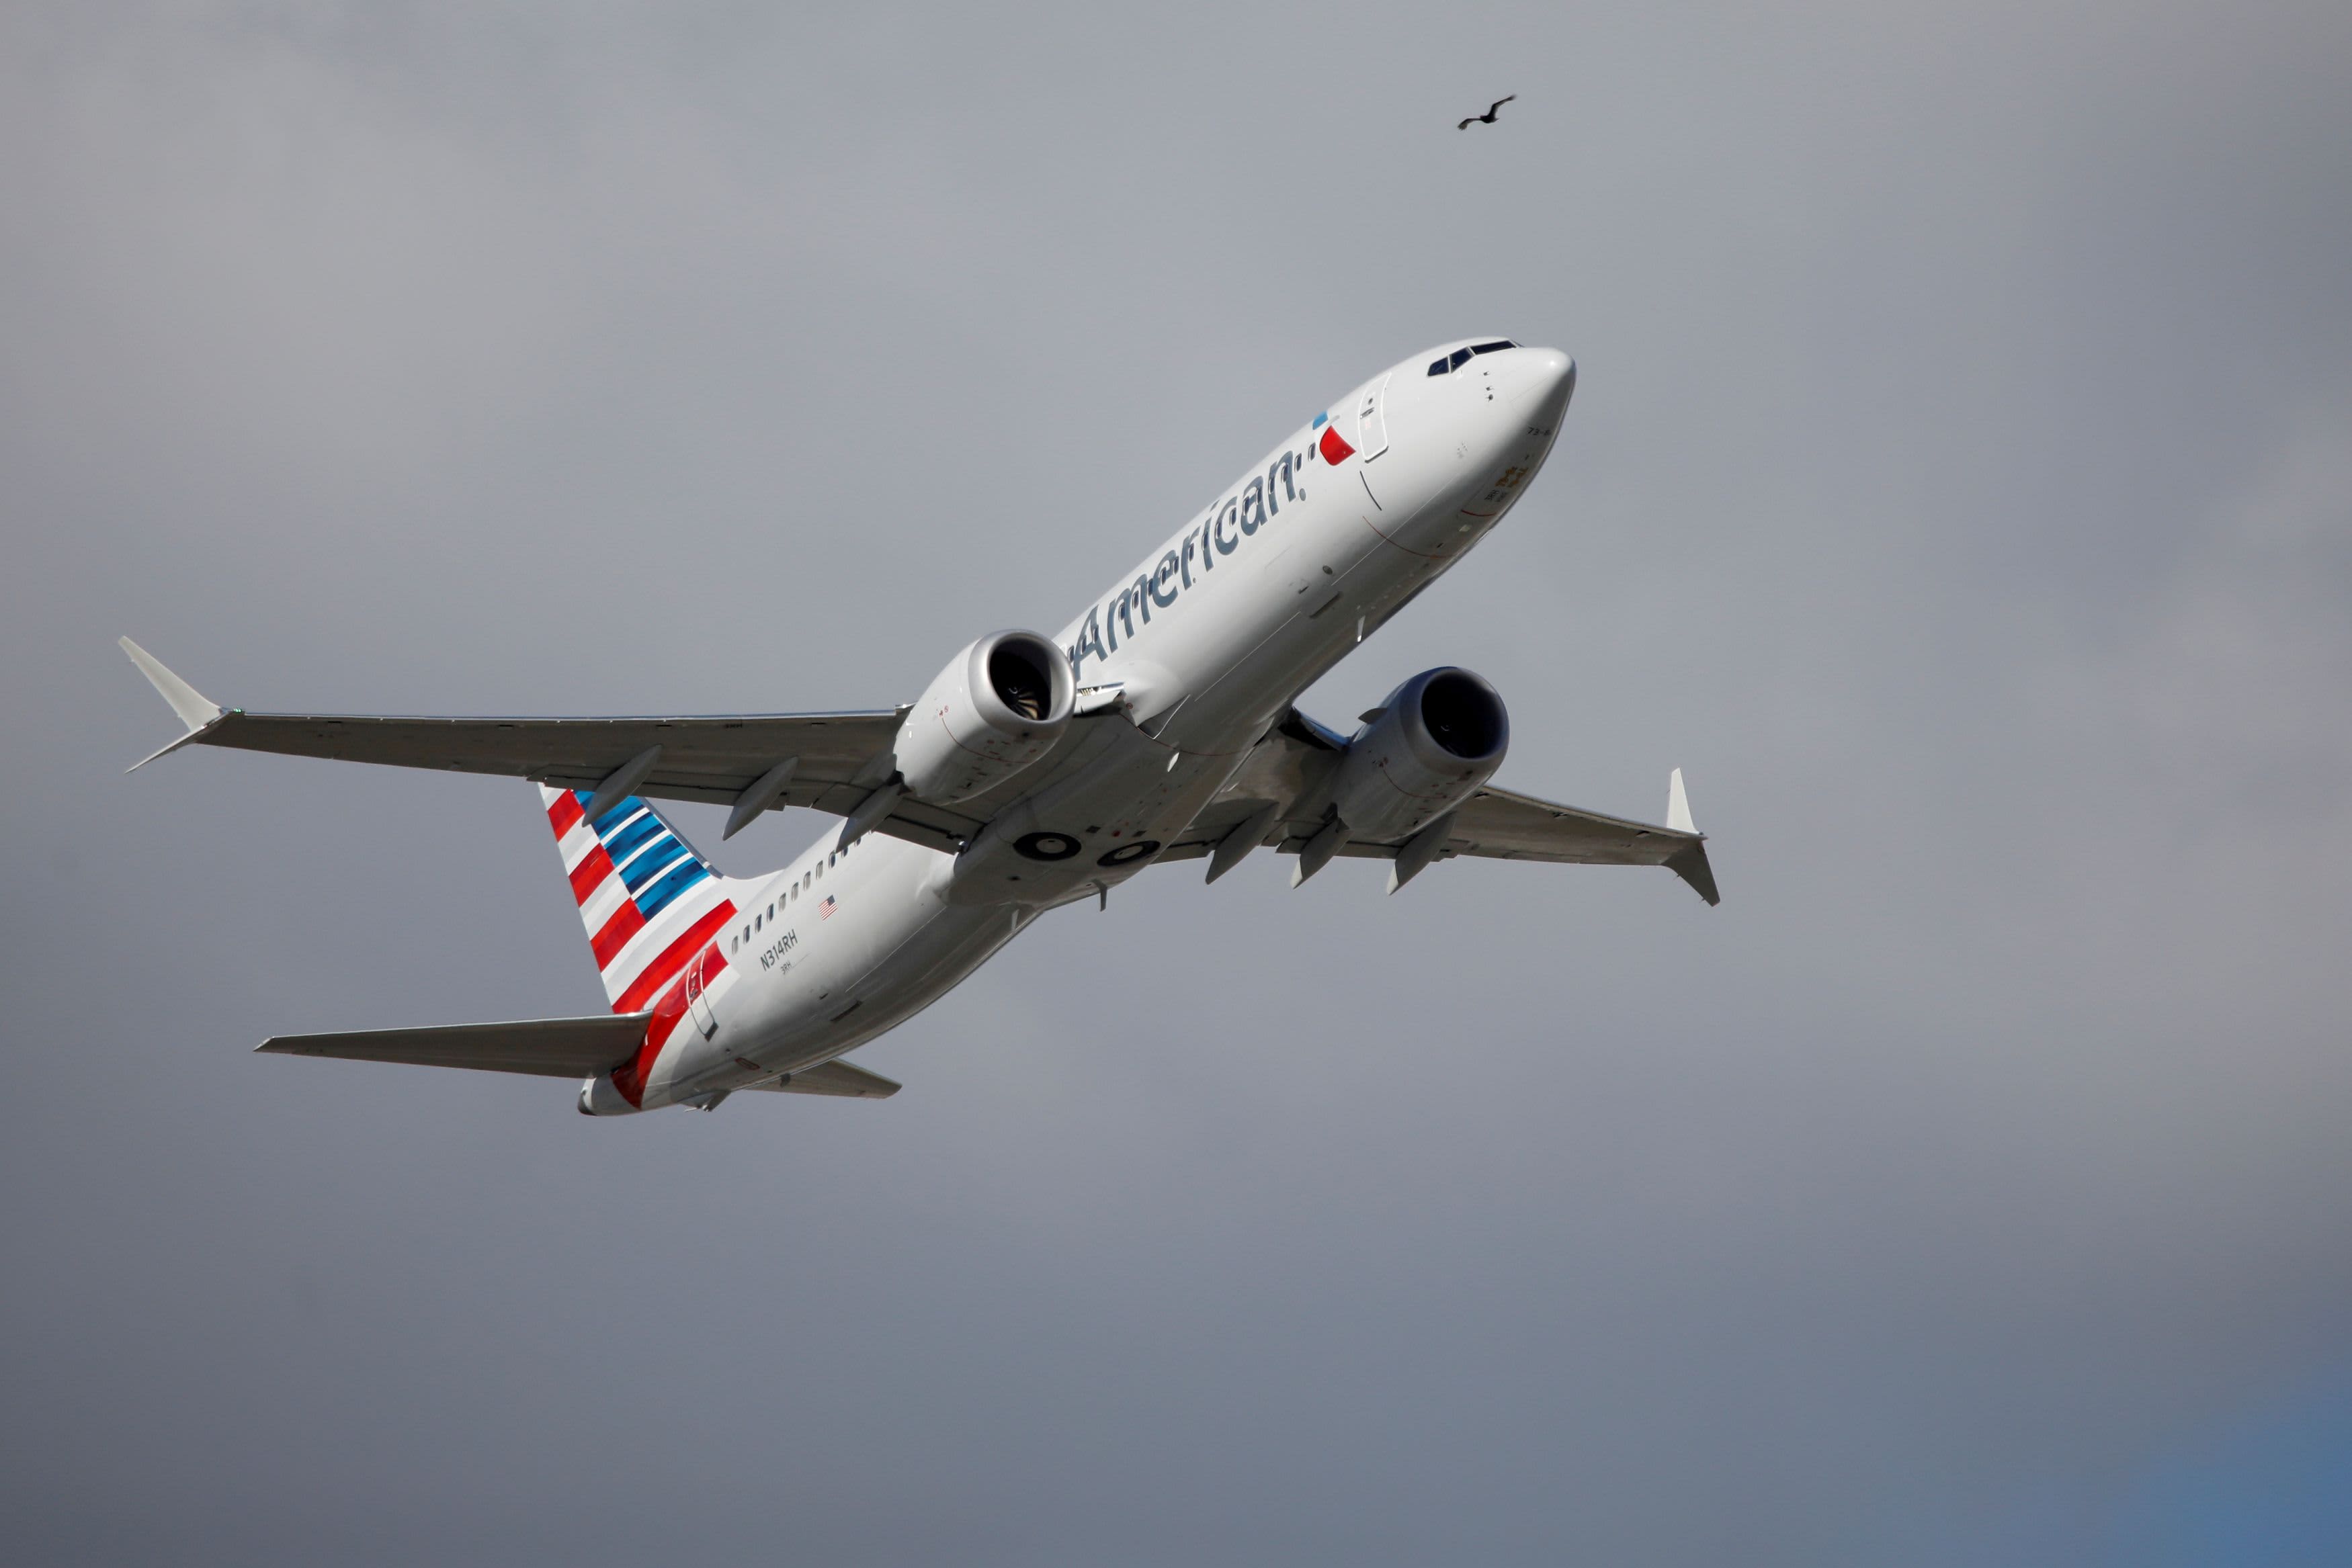 American Airlines will resume pilot employment this fall as travel demand recovers